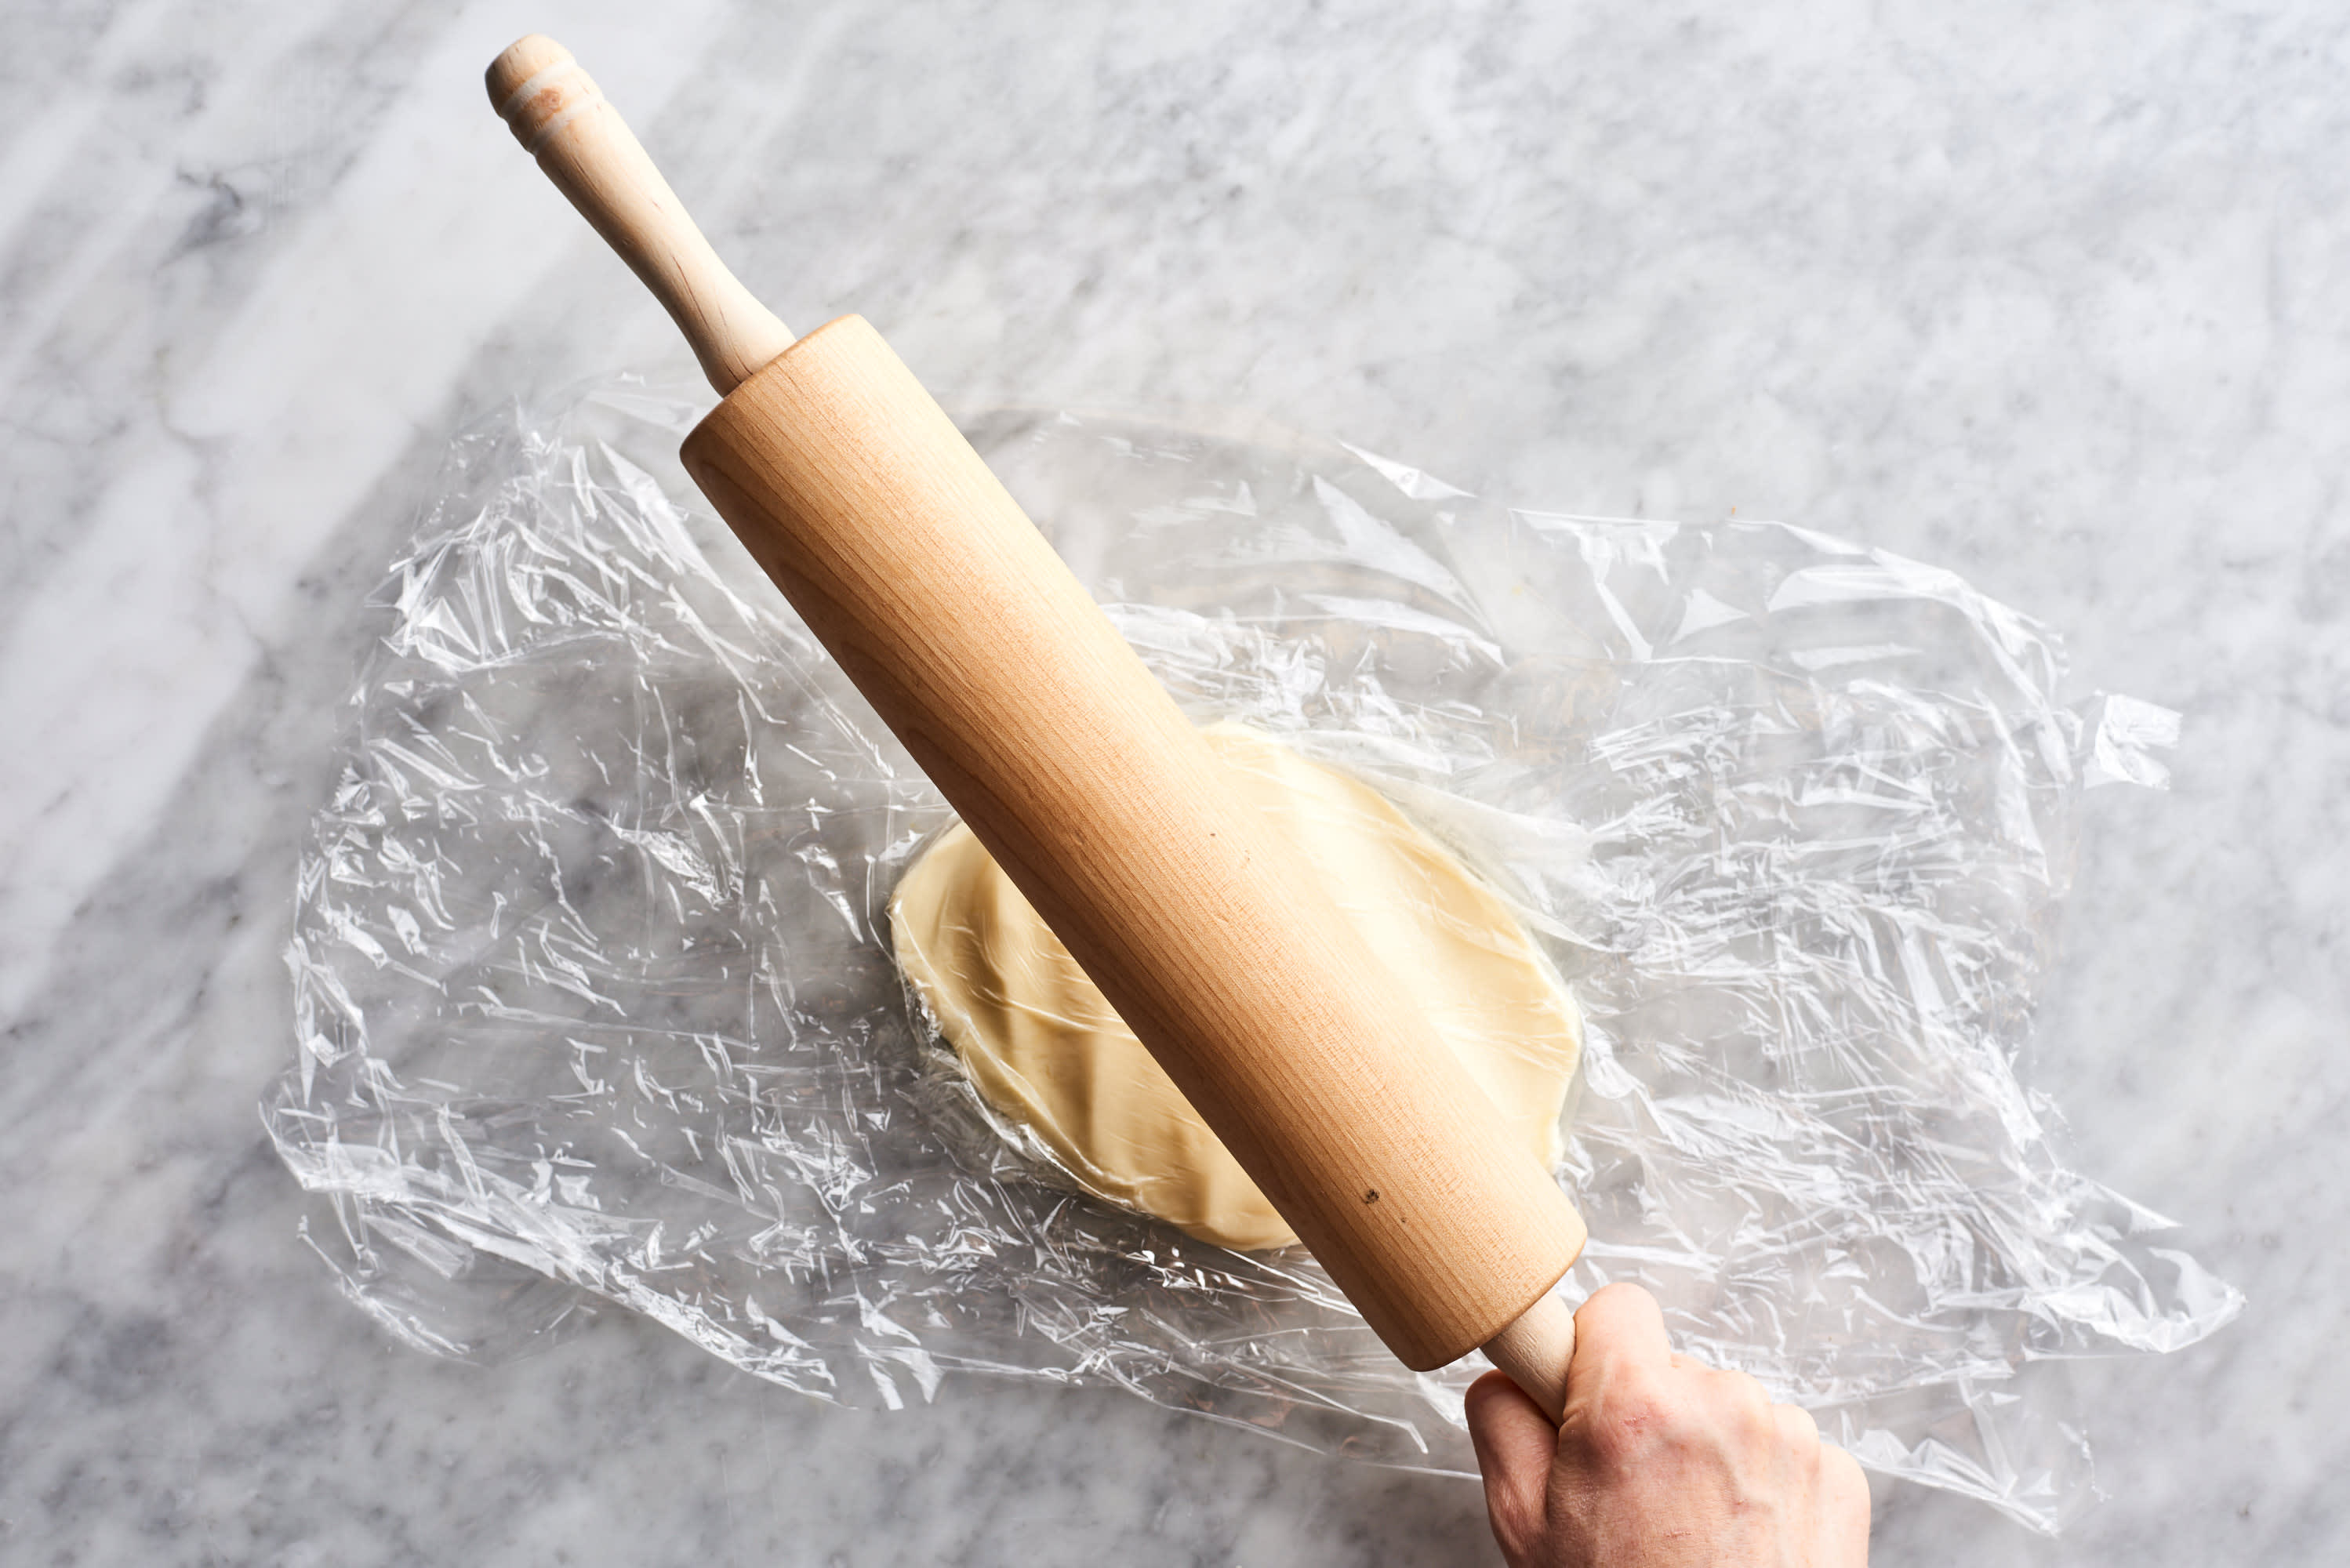 These Are The 5 Baking Tools You Really Need